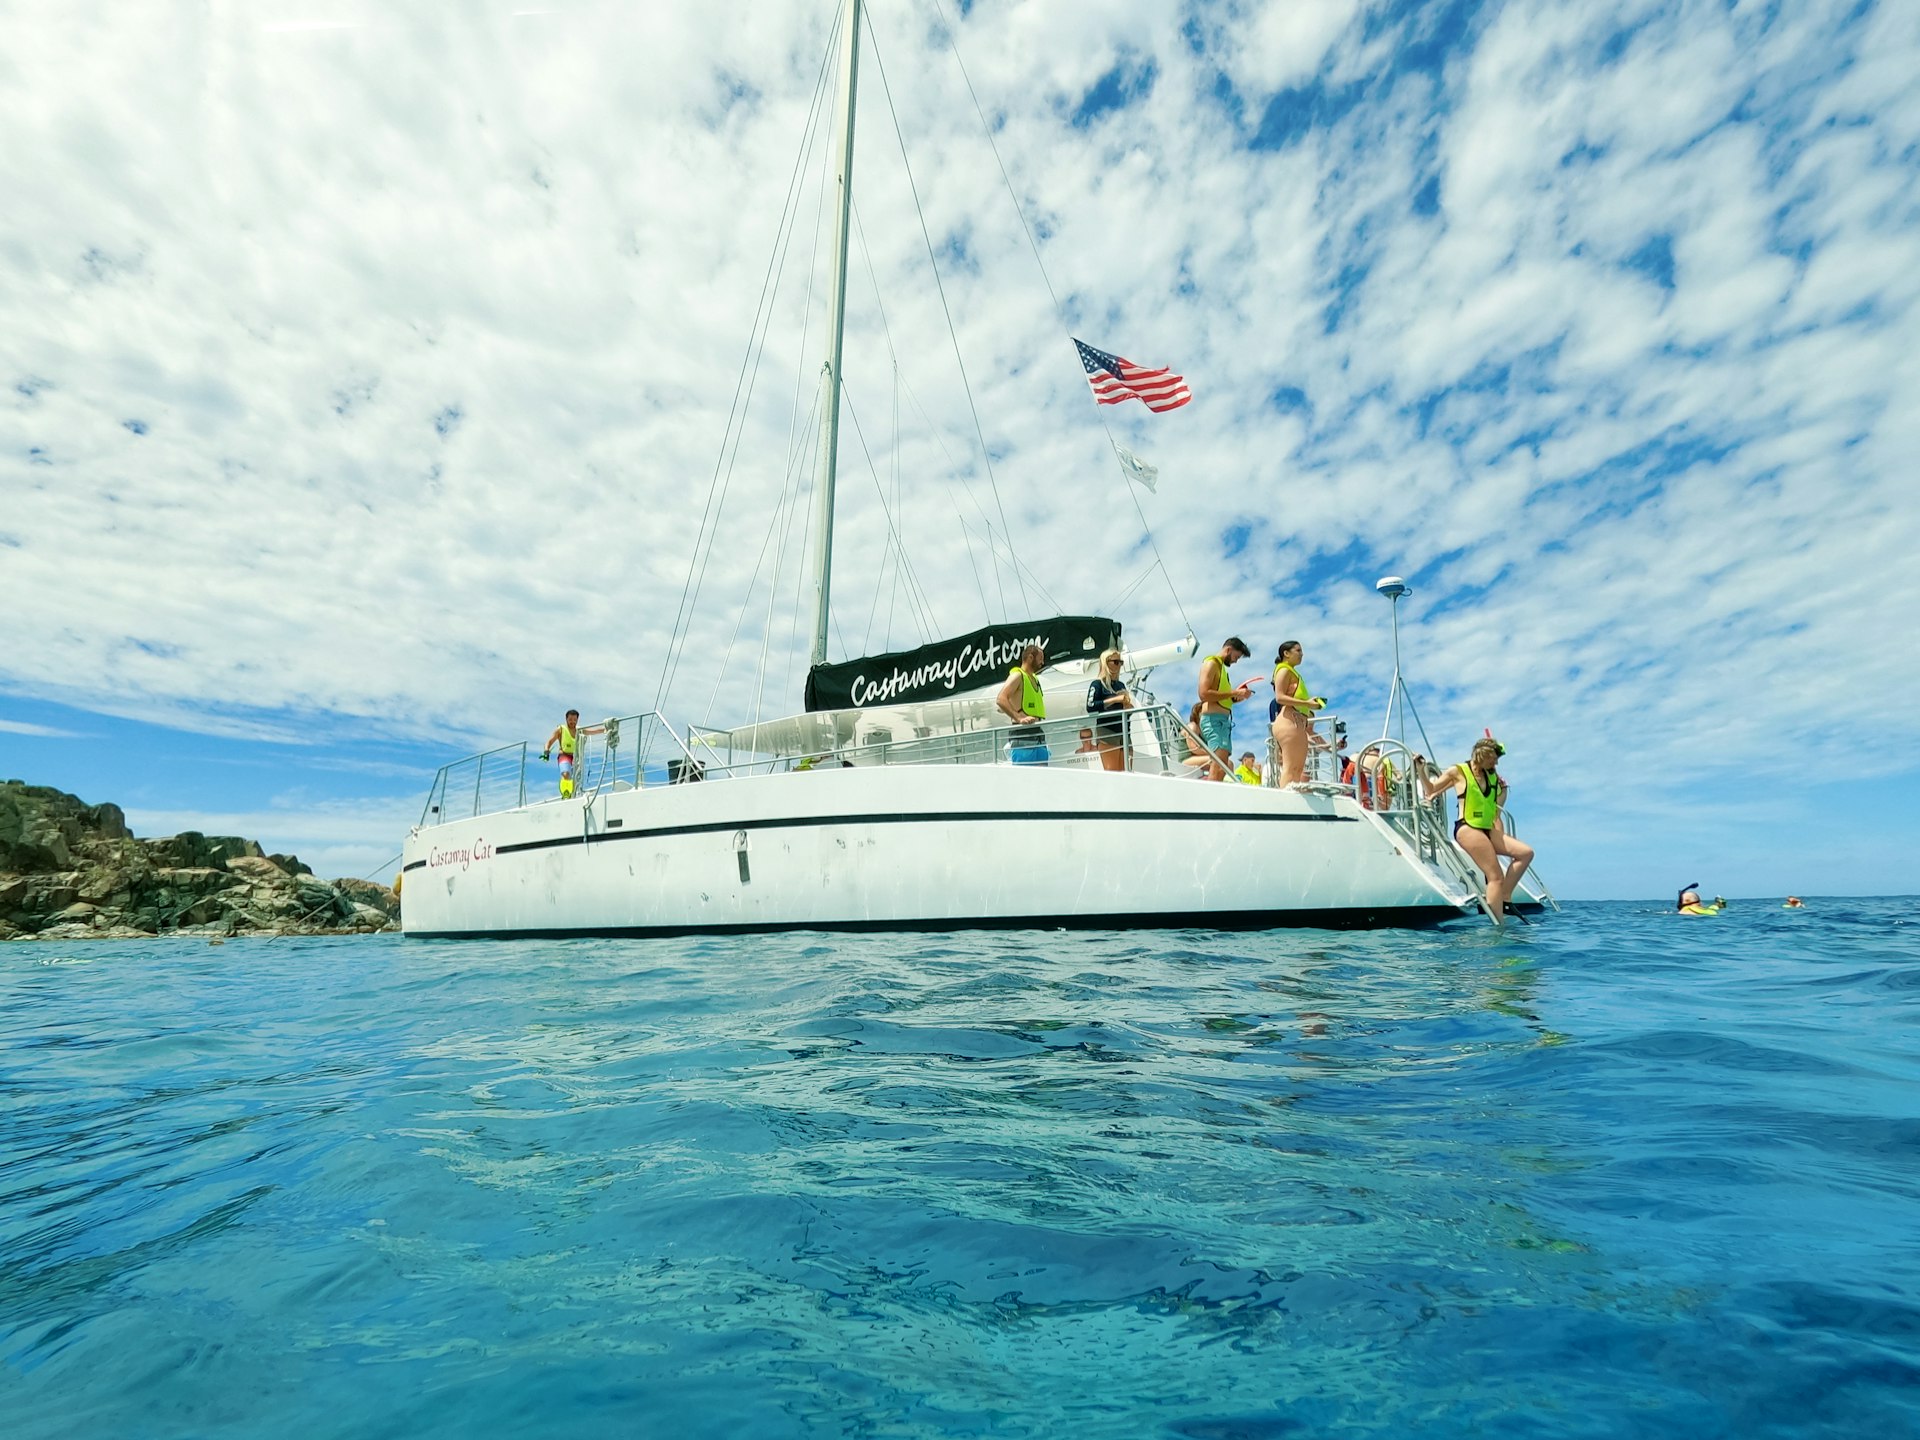 The people at snorkeling underwater and fishing tour by boat at the Caribbean Sea at Honeymoon Beach on St. Thomas, USVI in US Virgin Islands